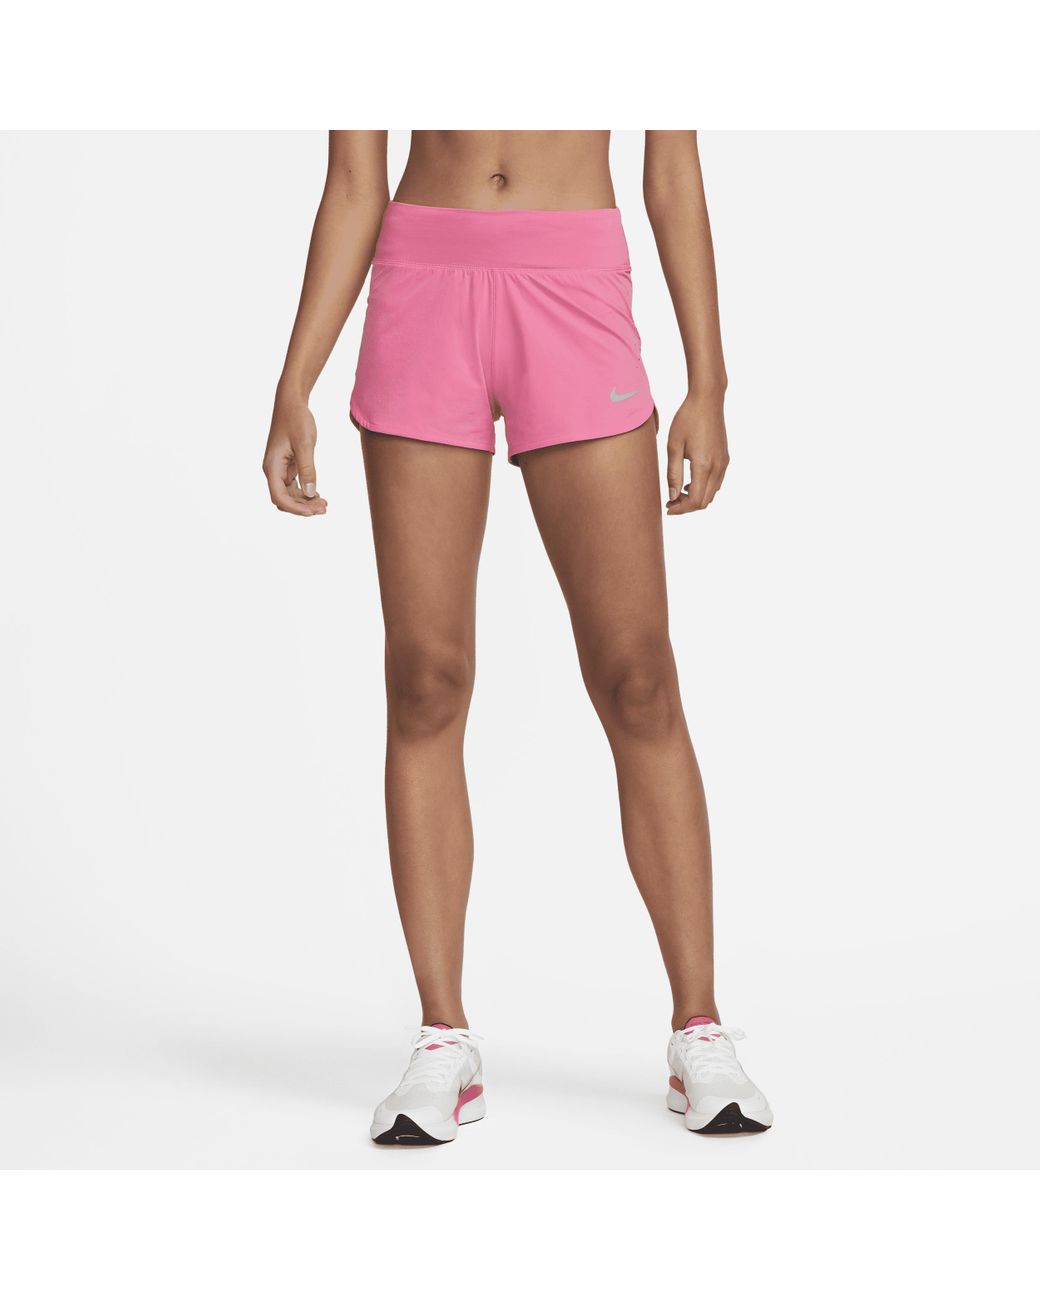 Nike Eclipse Running Shorts In Pink, | Lyst